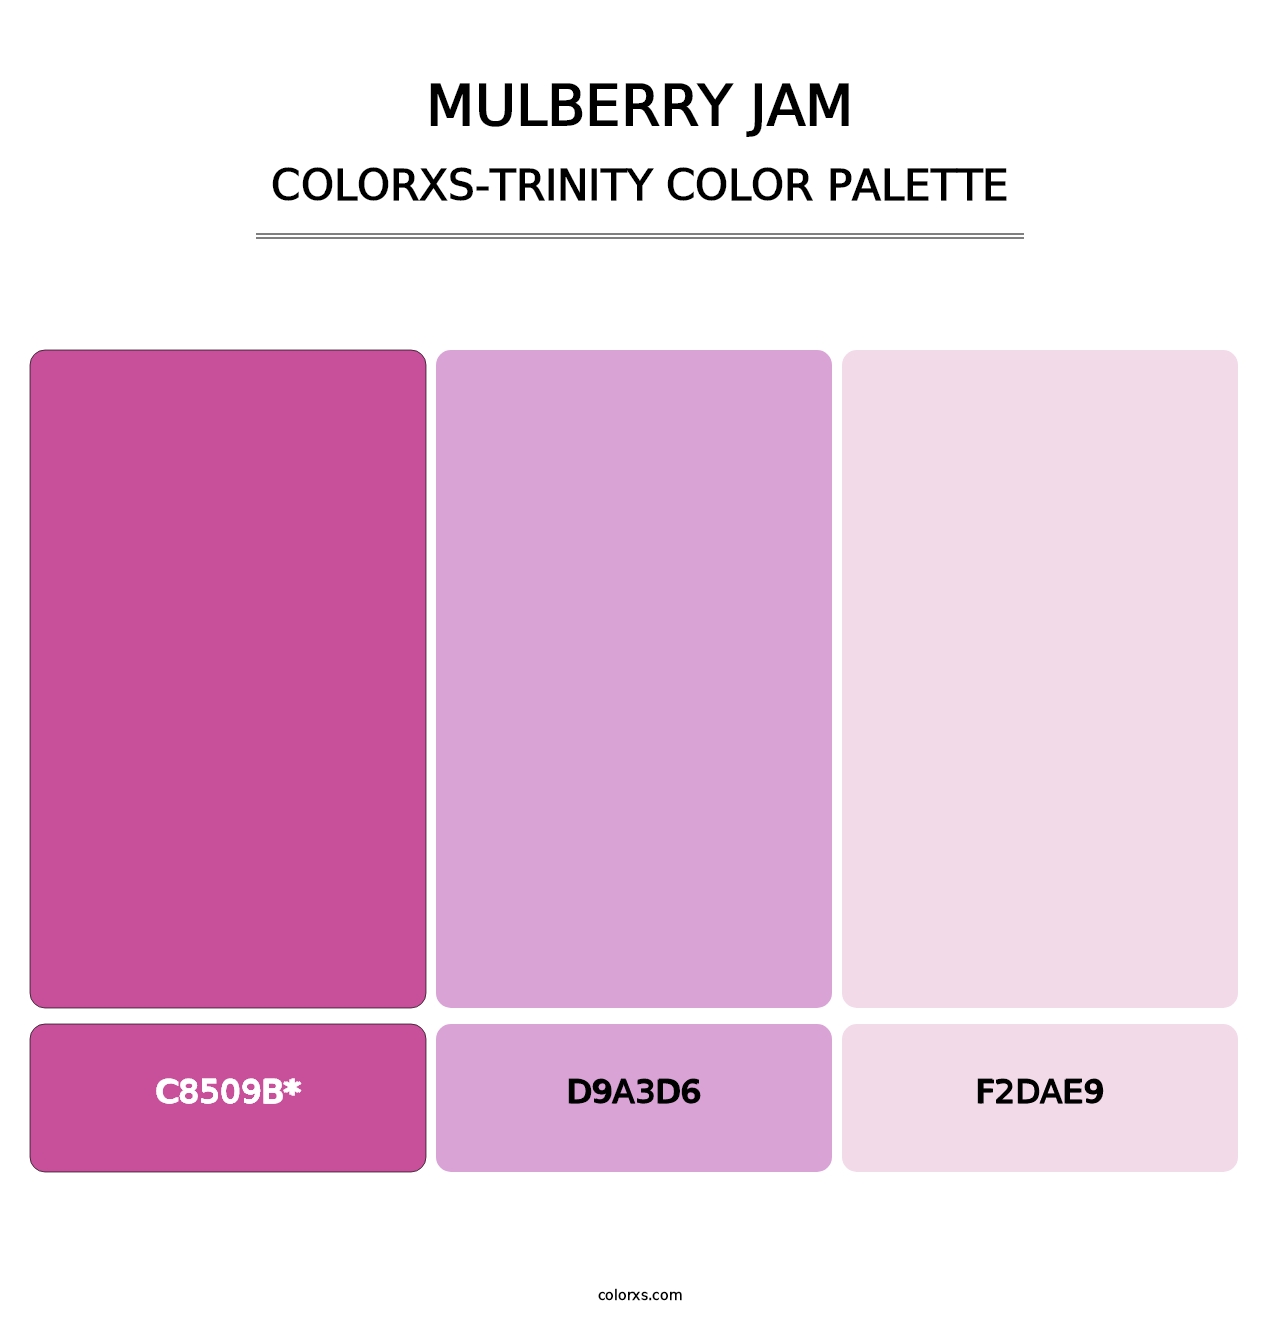 Mulberry Jam - Colorxs Trinity Palette